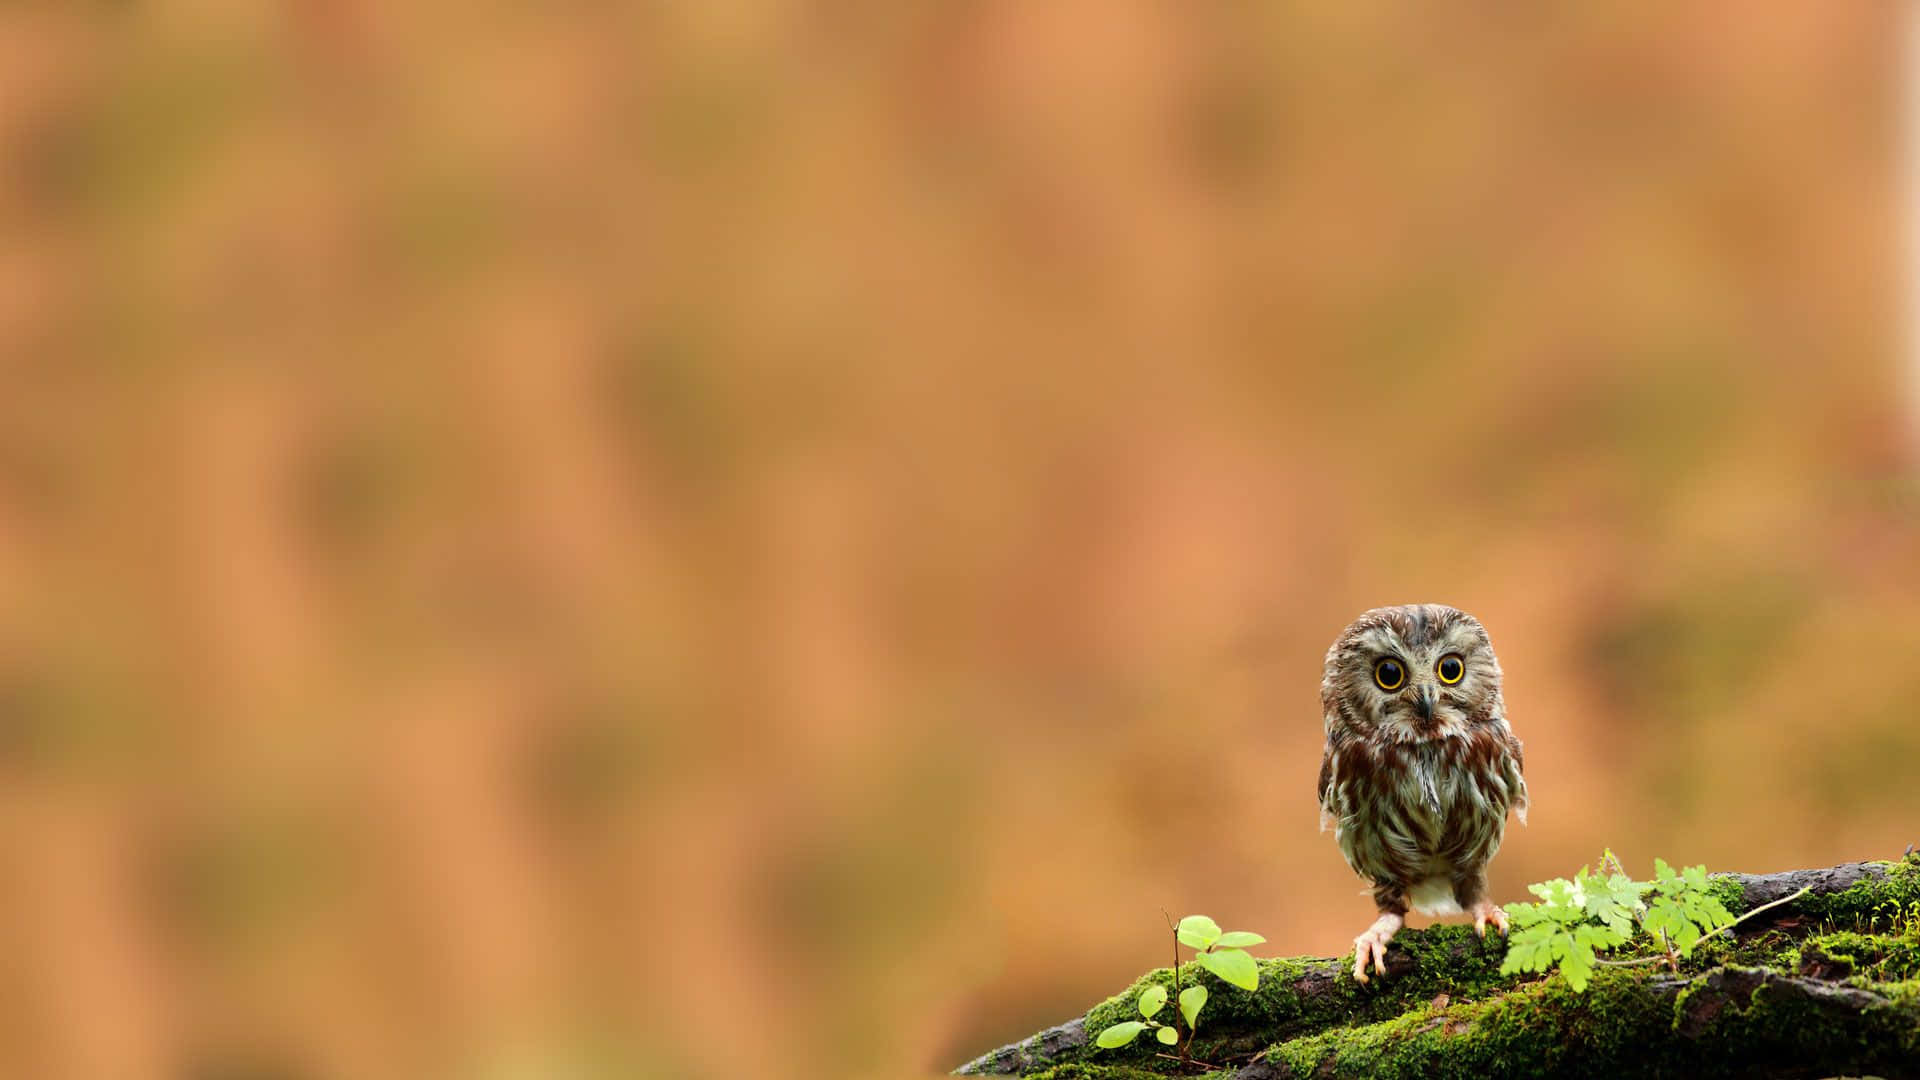 A Wise Old Owl Perched in a Tree